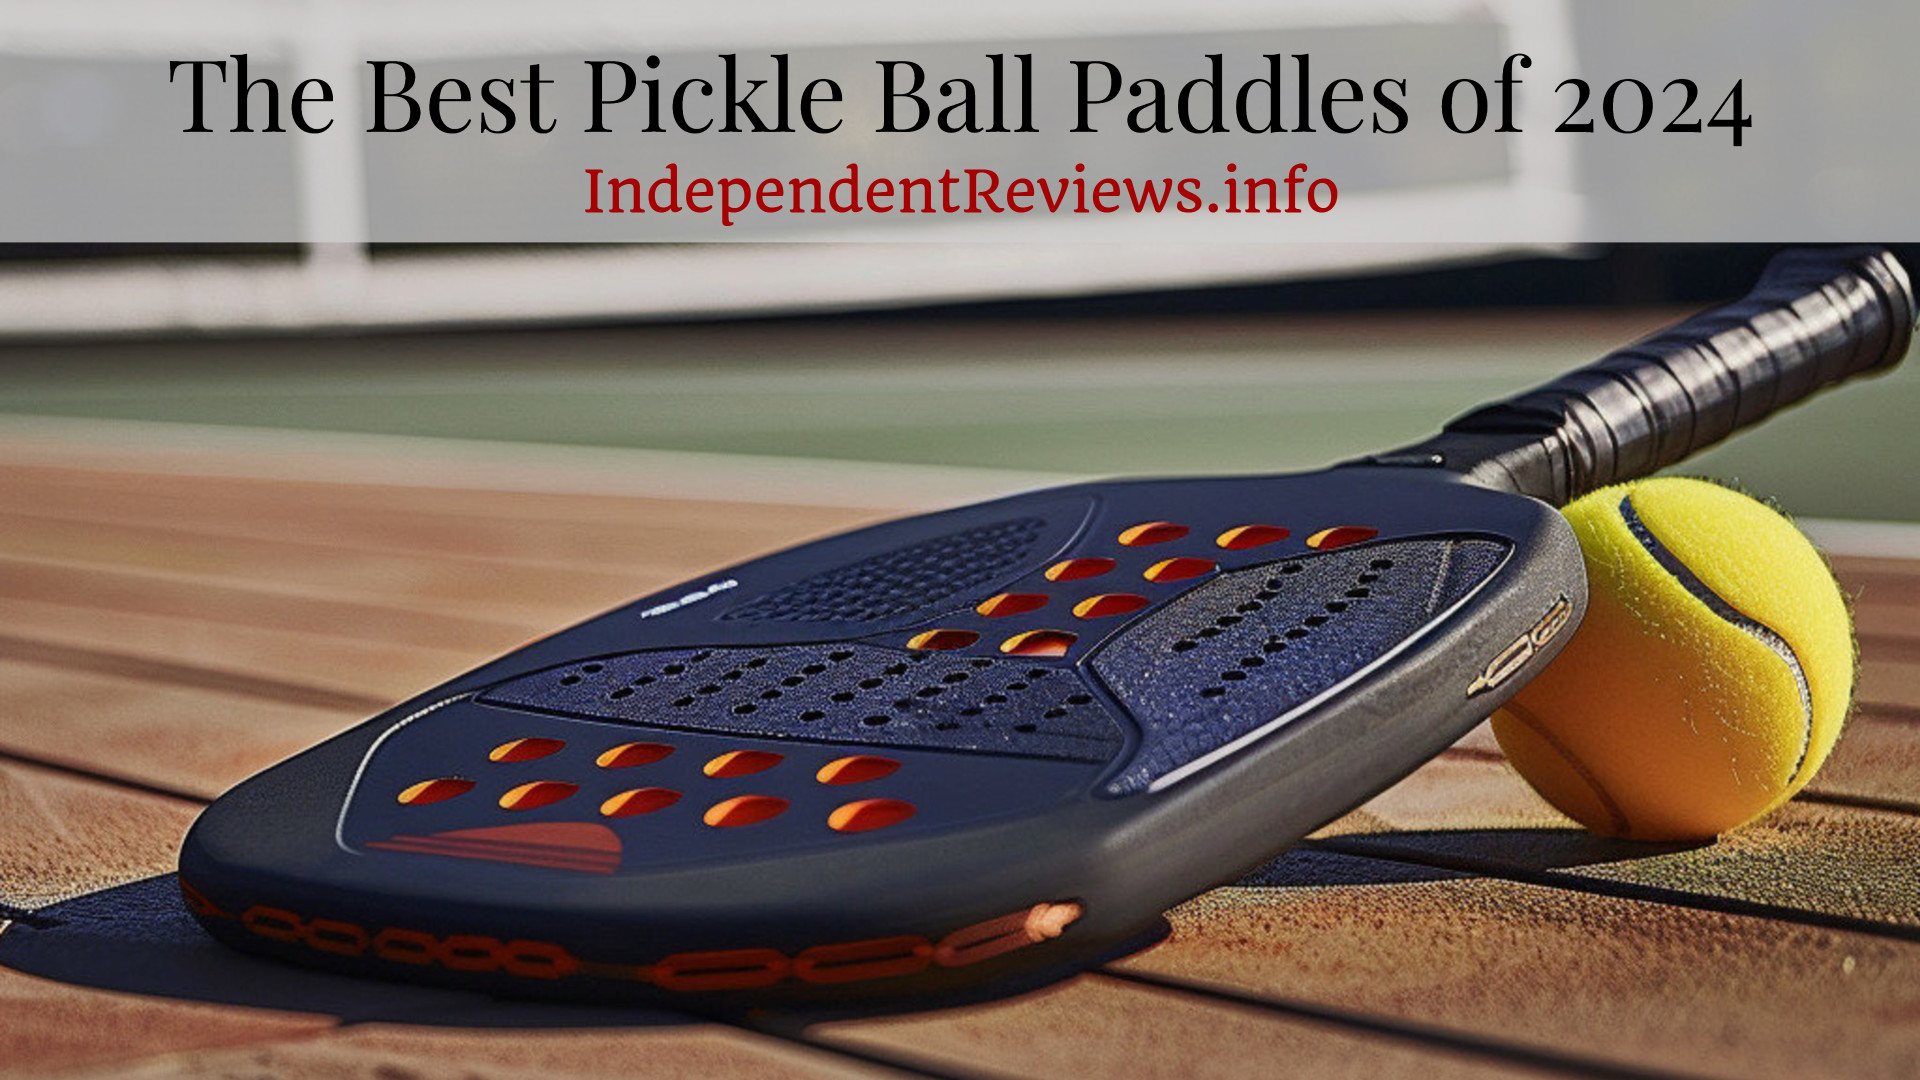 Best Pickle ball paddles of 2024